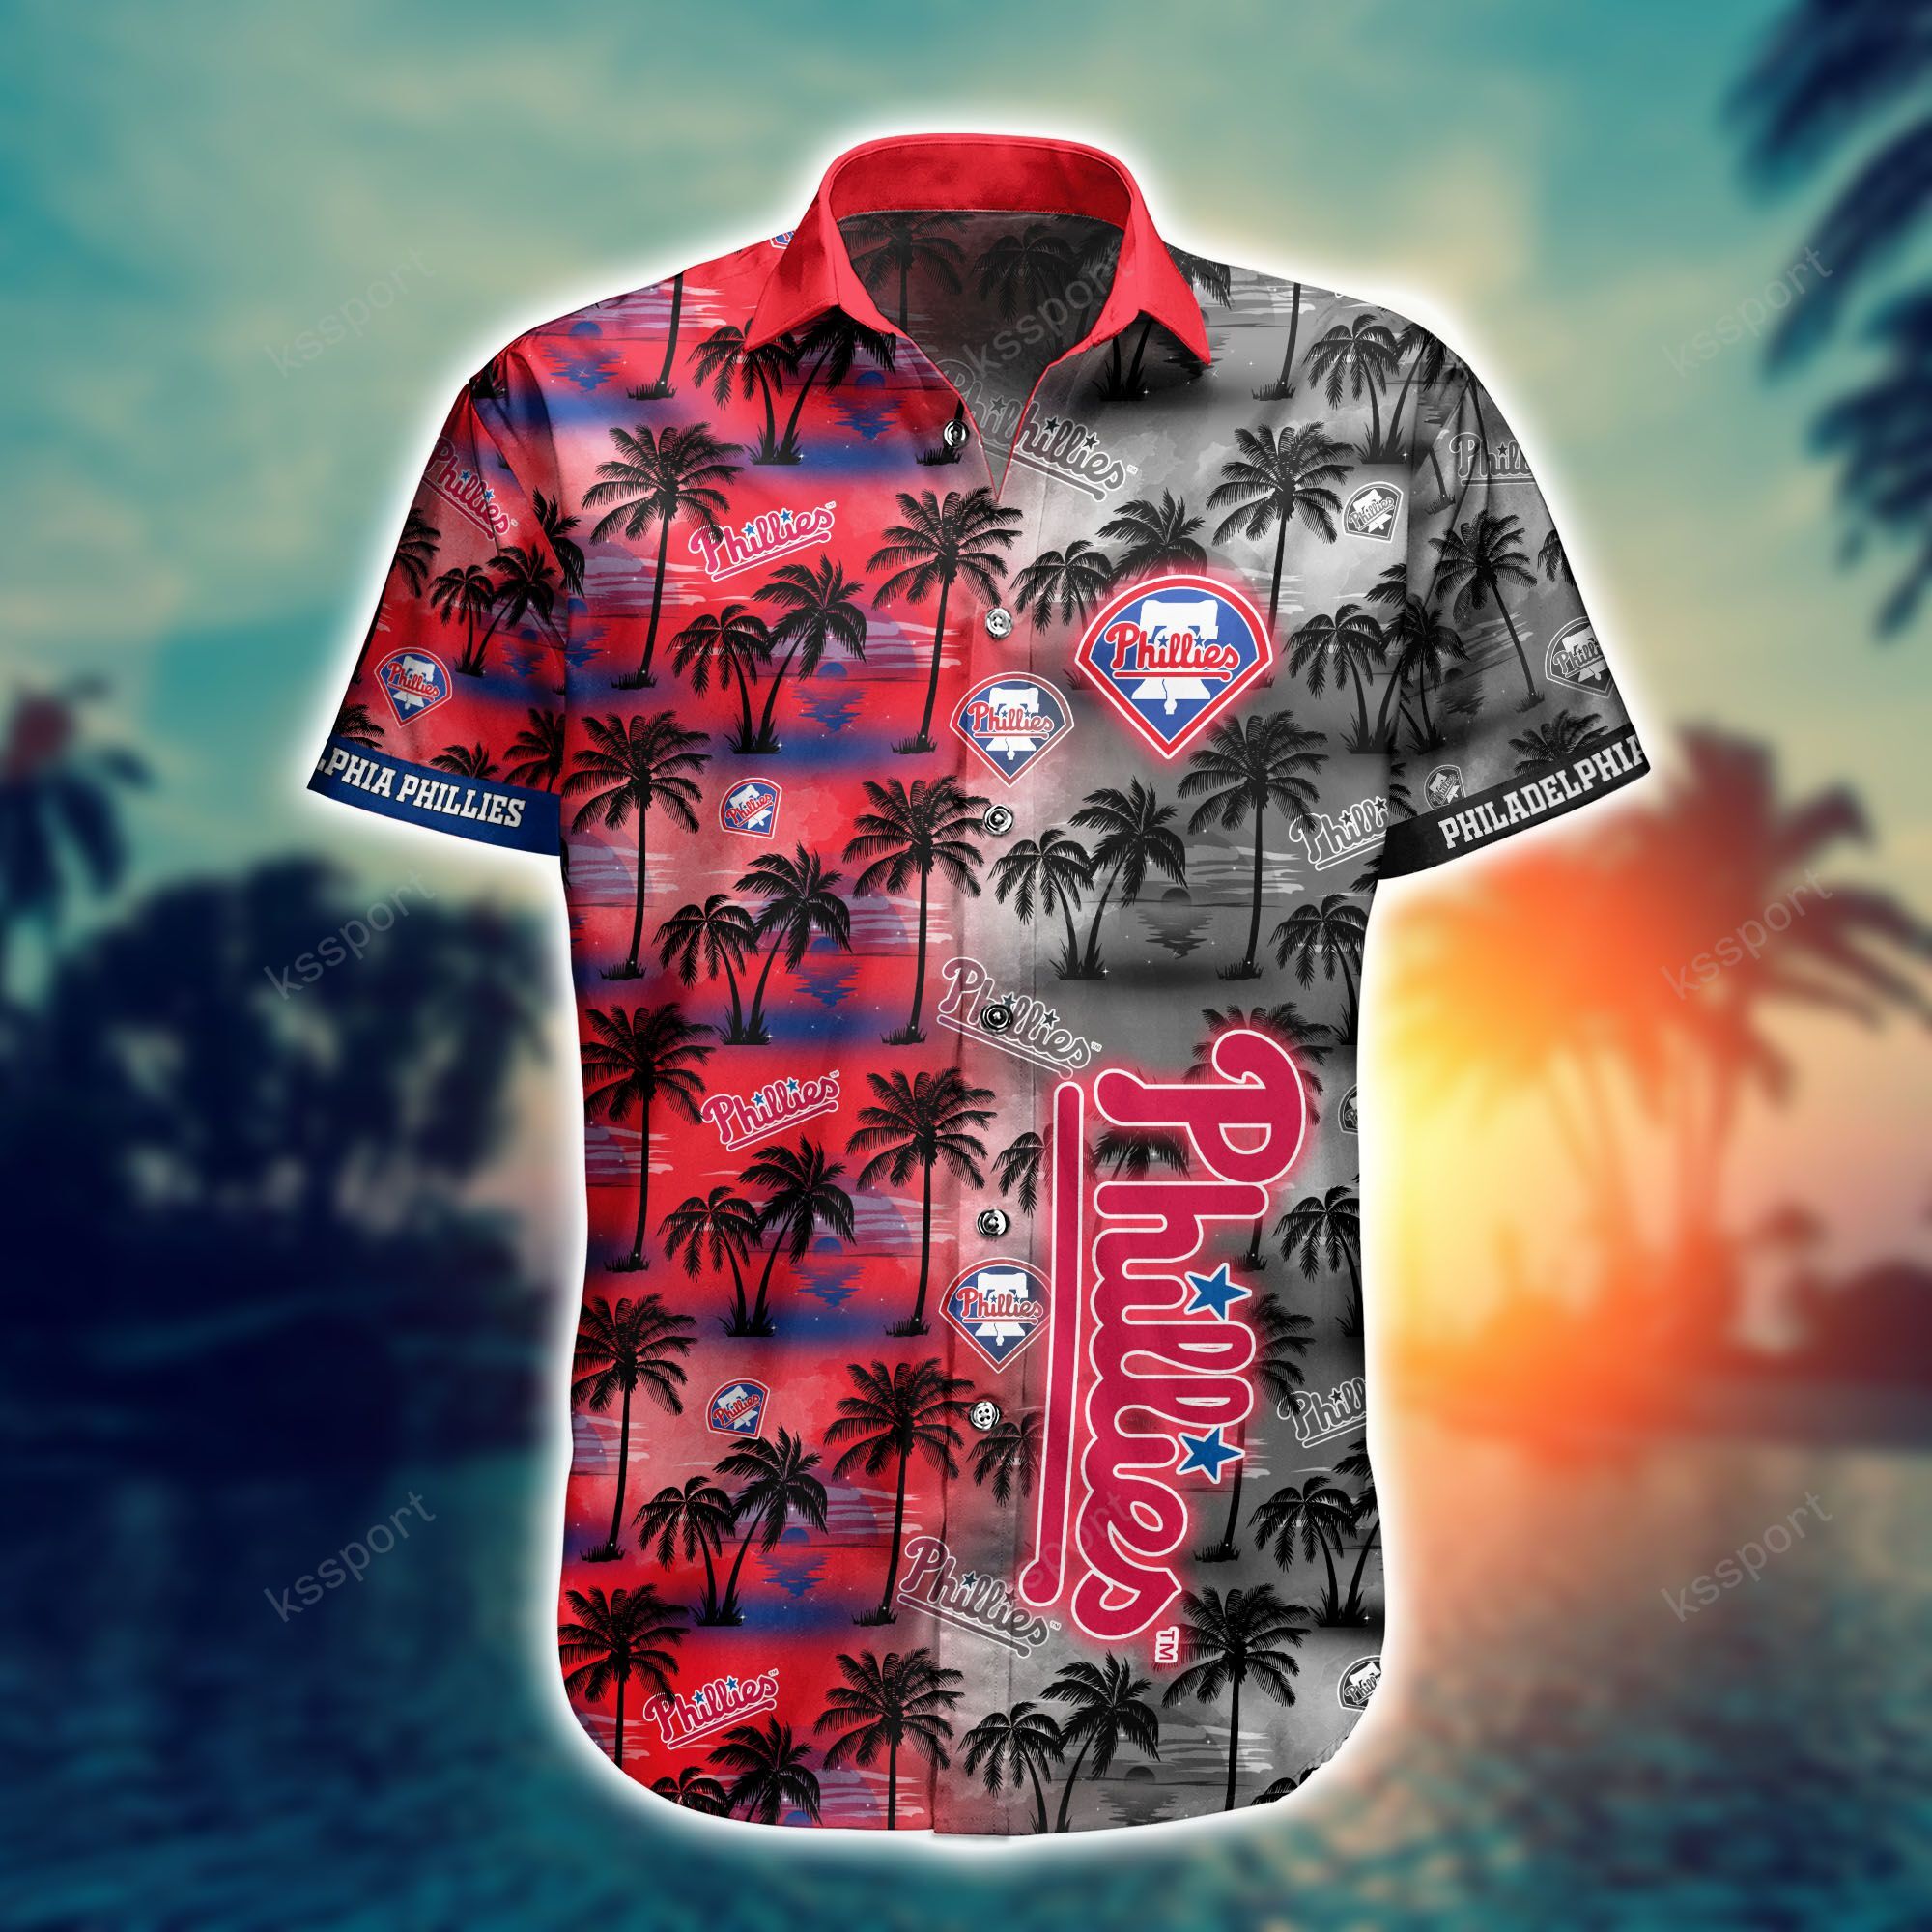 Top cool Hawaiian shirt 2022 - Make sure you get yours today before they run out! 230